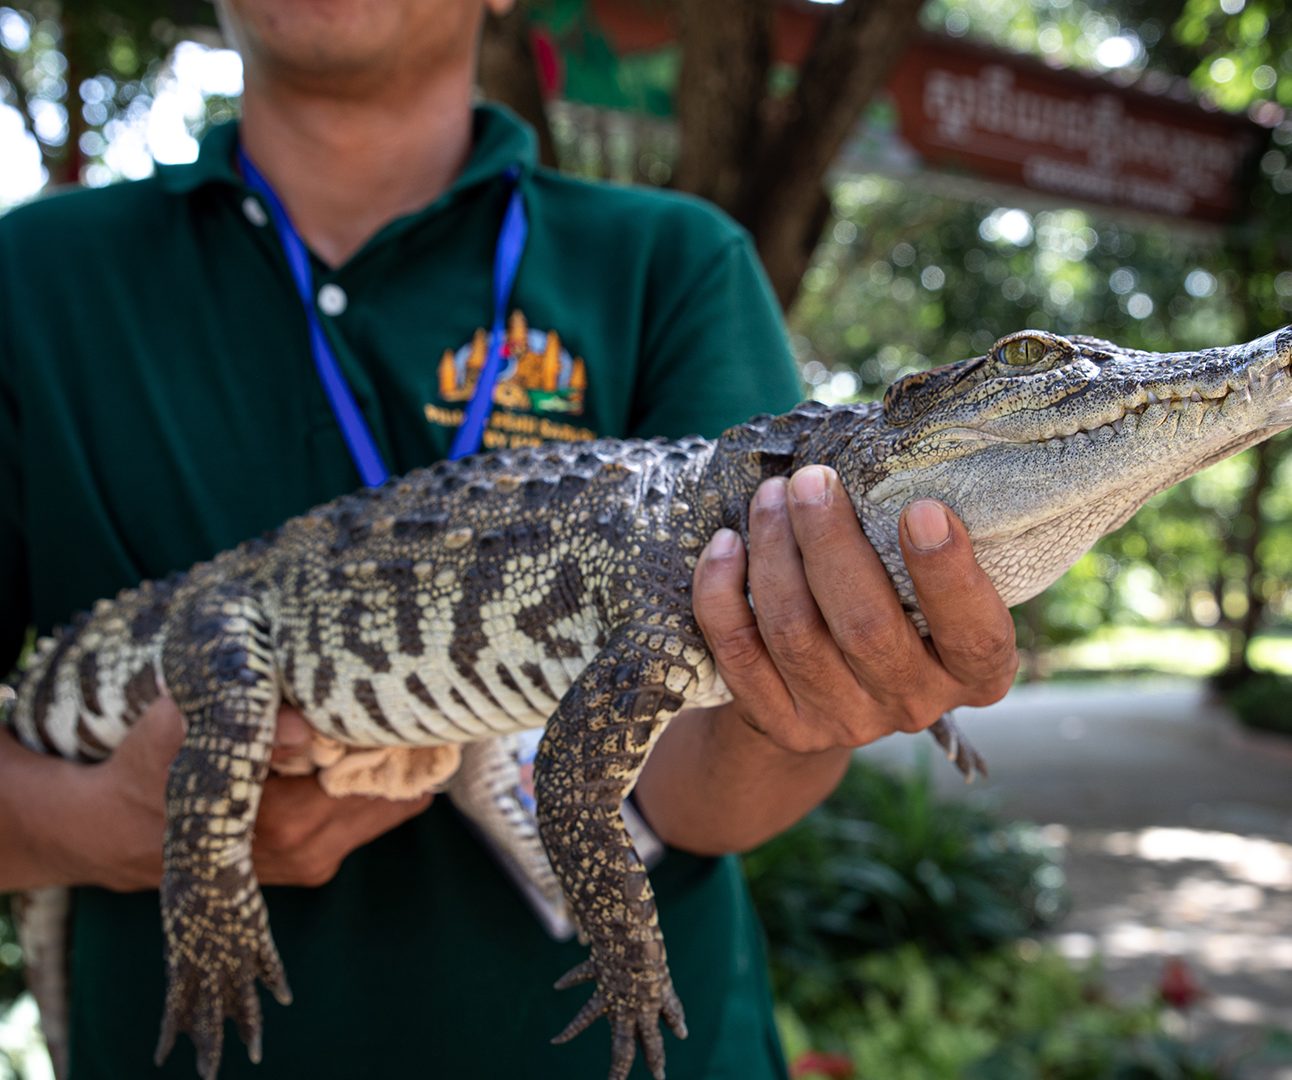 A person holding a young crocodile in a captive setting.